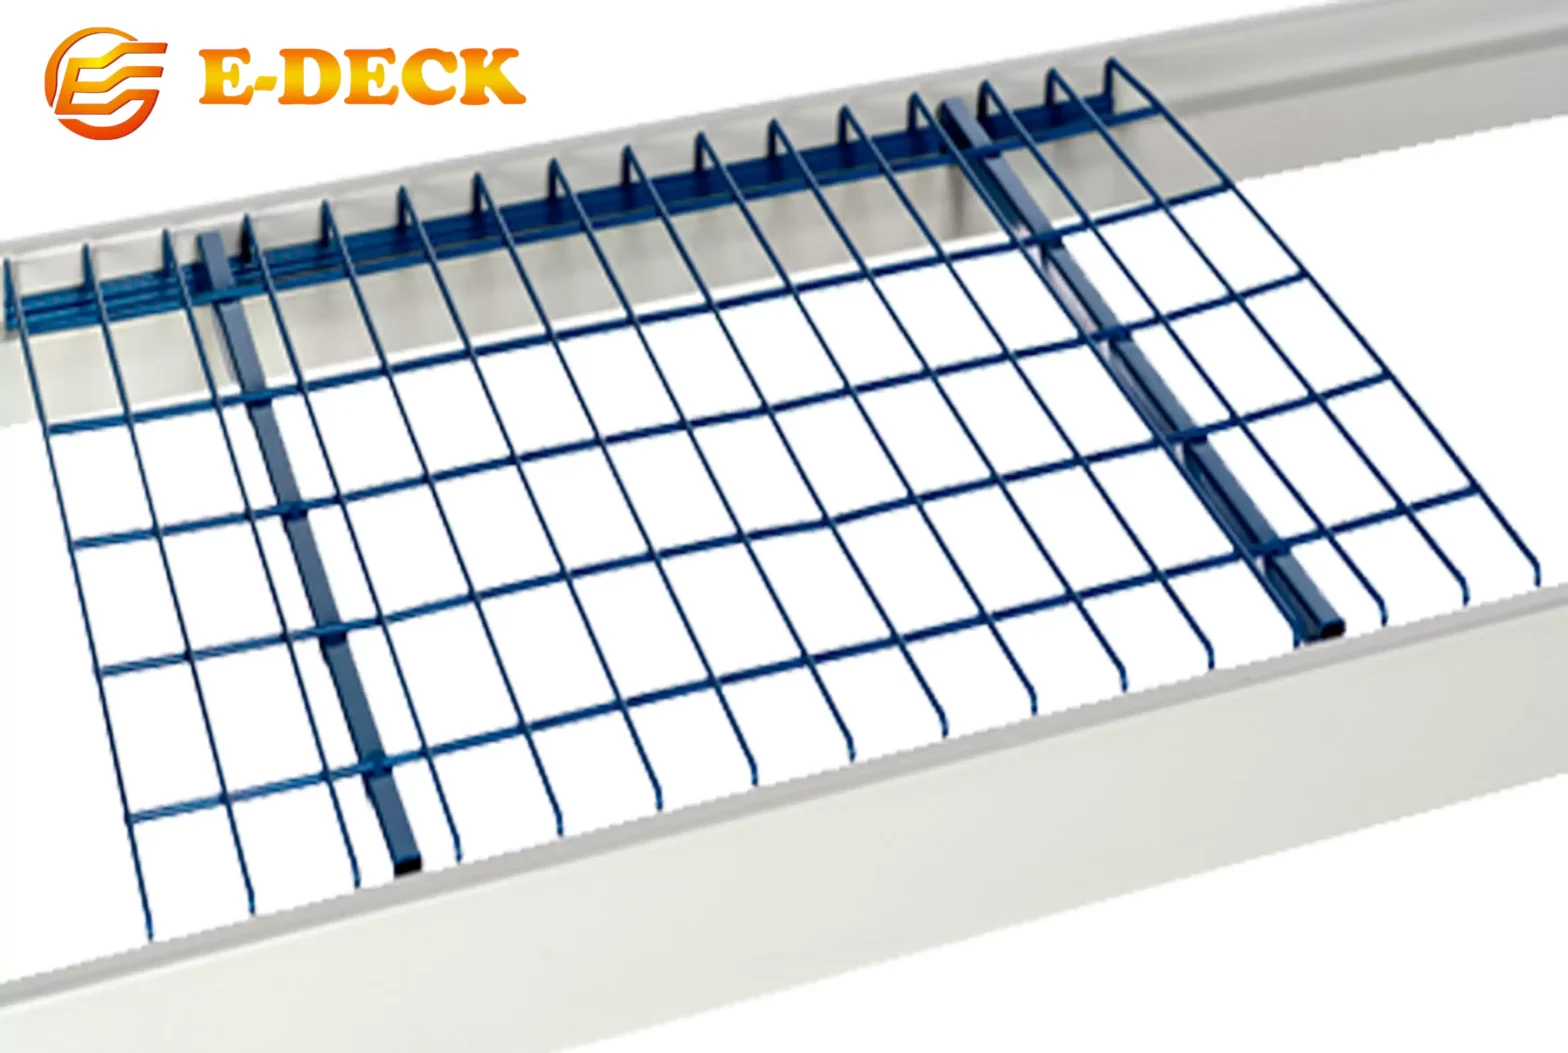 Wire Decking: Tips To Make Your Warehouse Safe and Sound